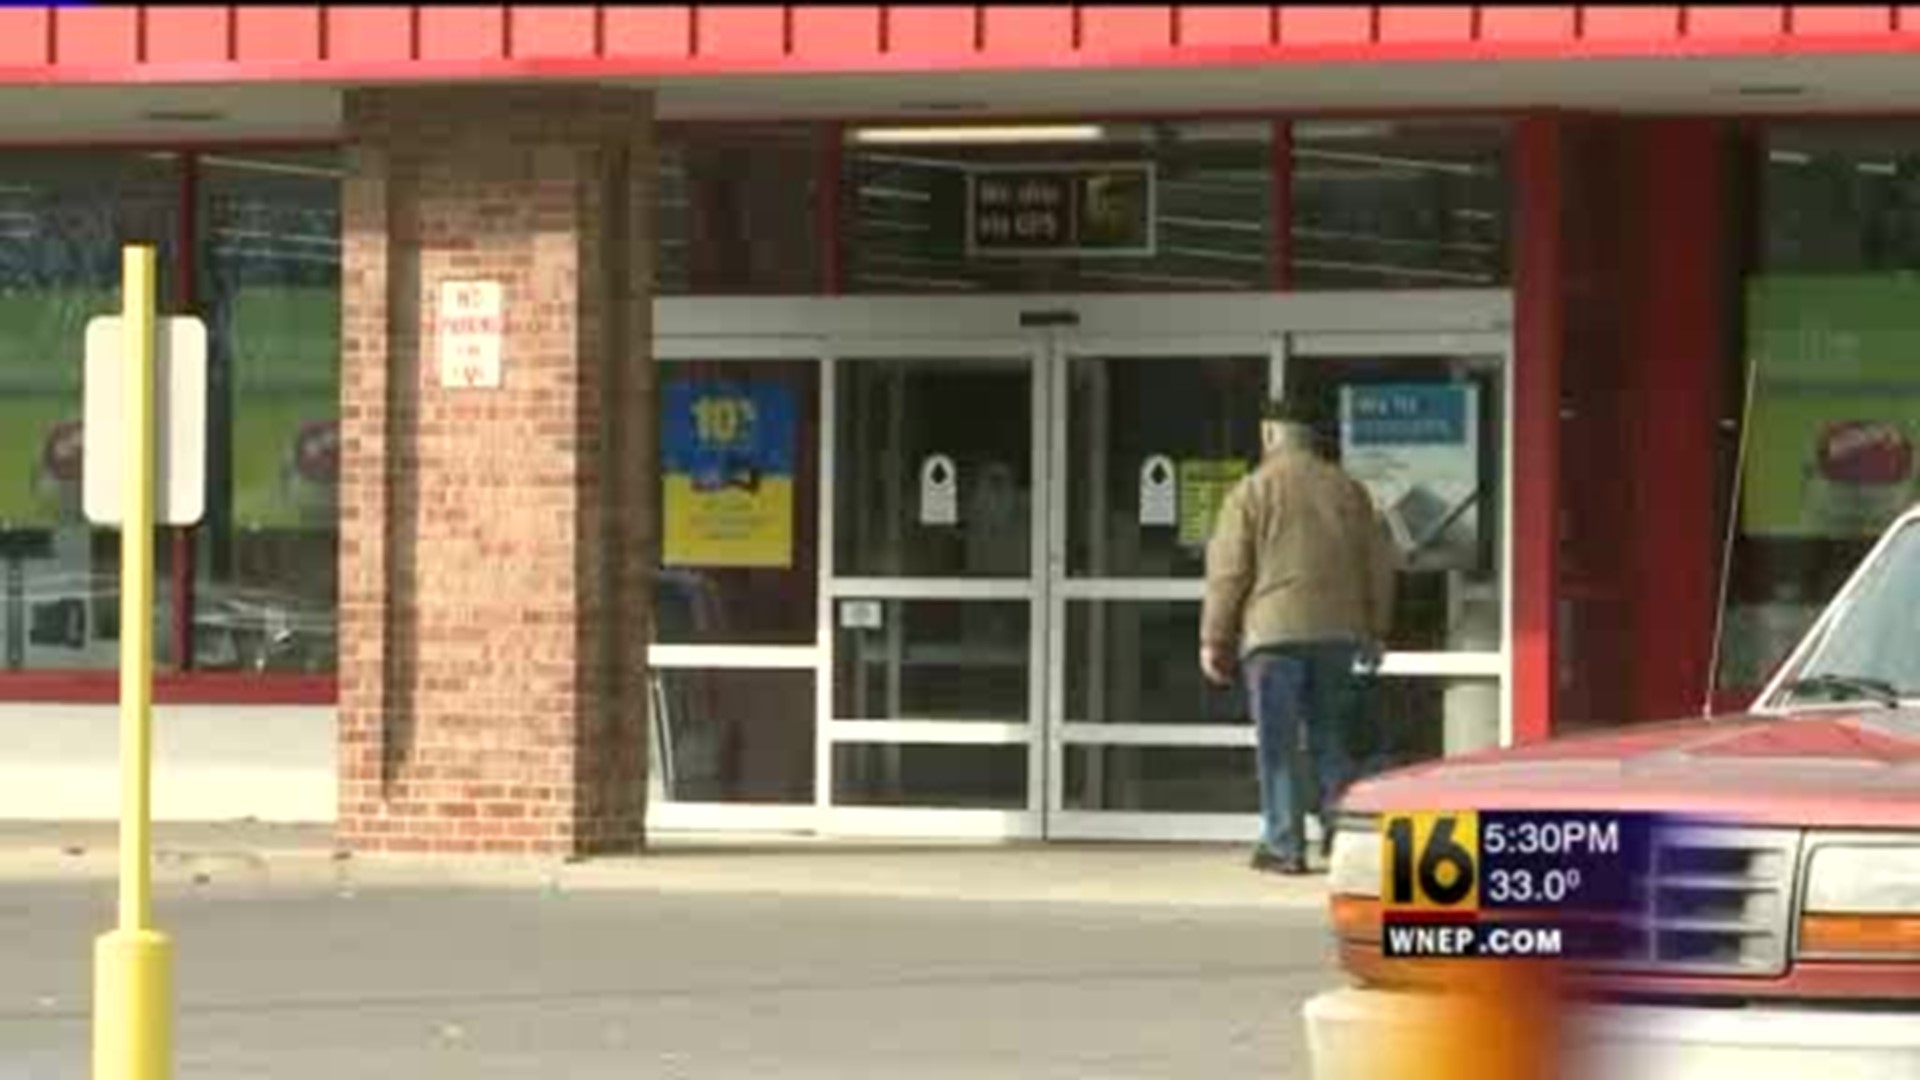 Staples Near Lewisburg to Close